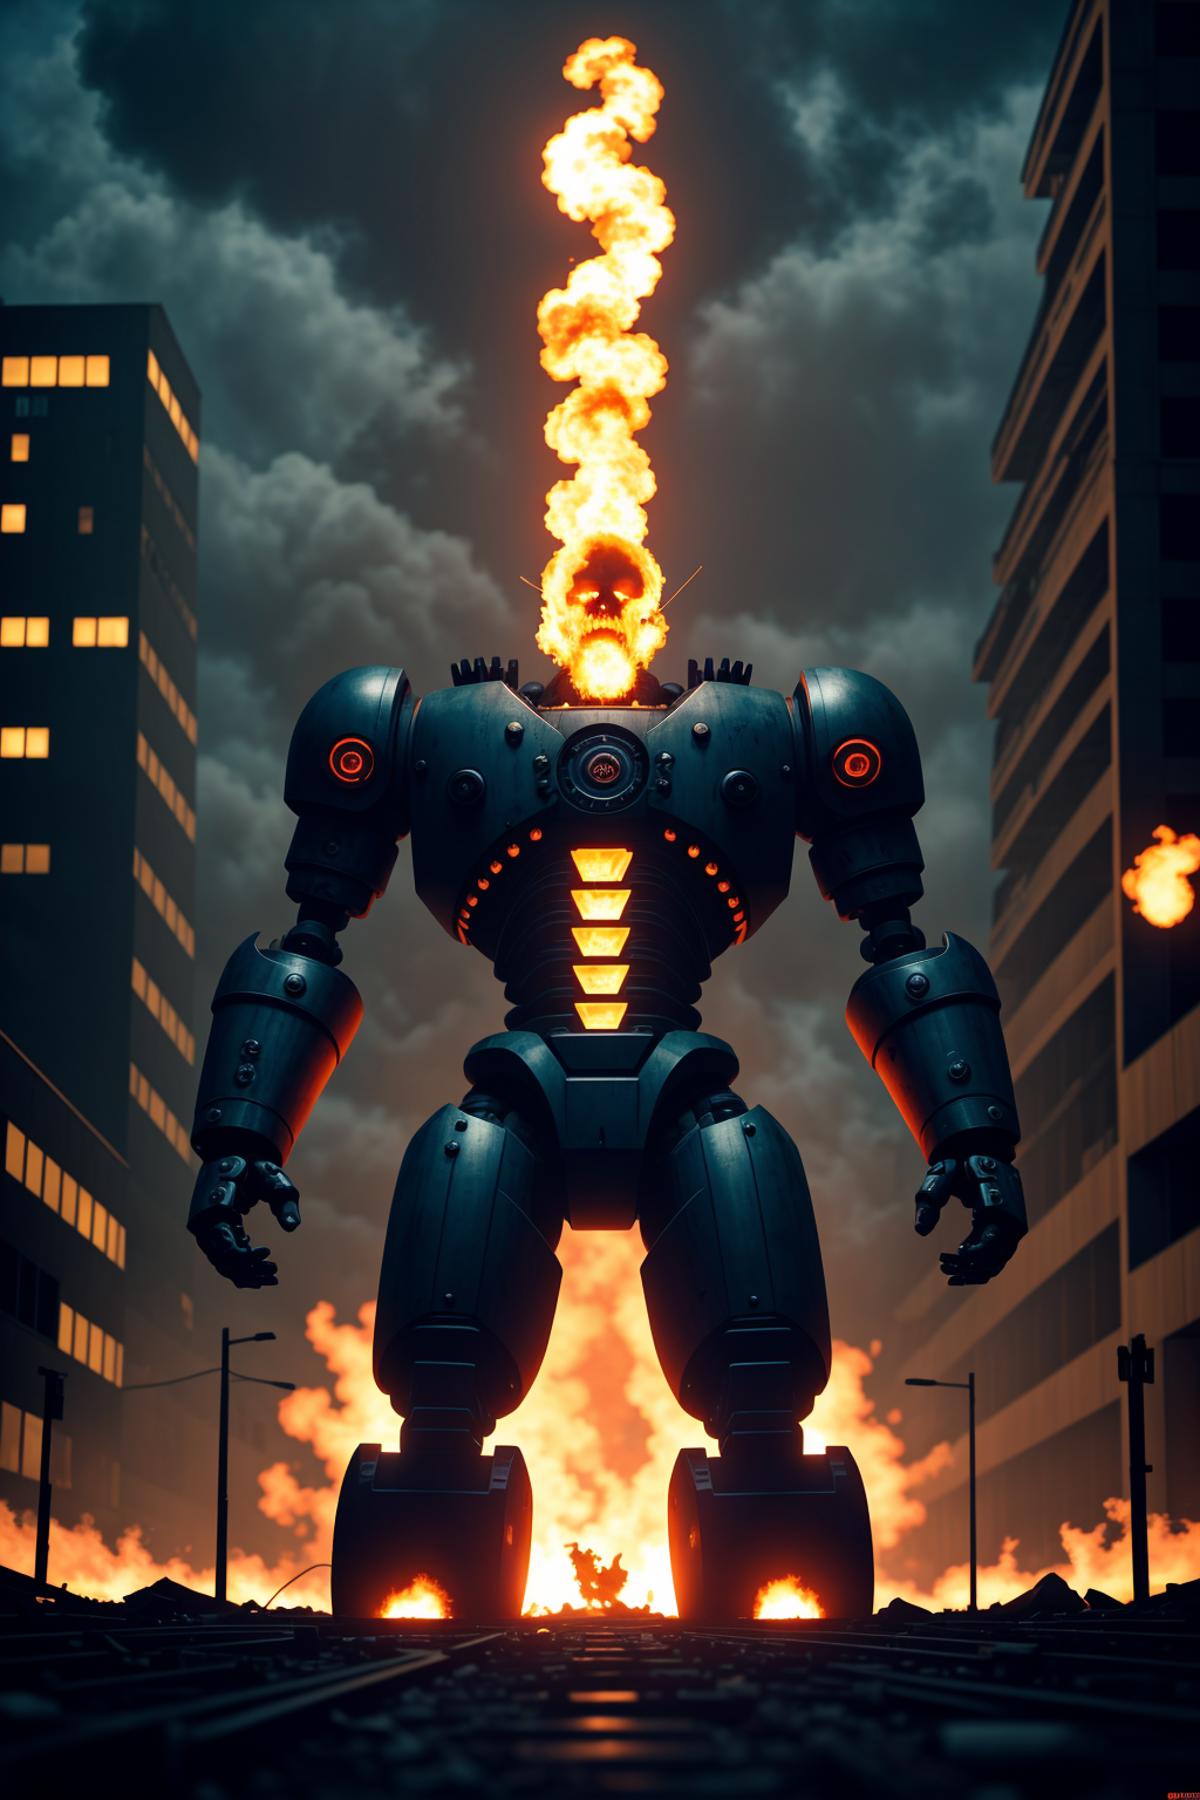 An Intense Scene of a Robot with Flames Coming Out of its Head Standing in a City